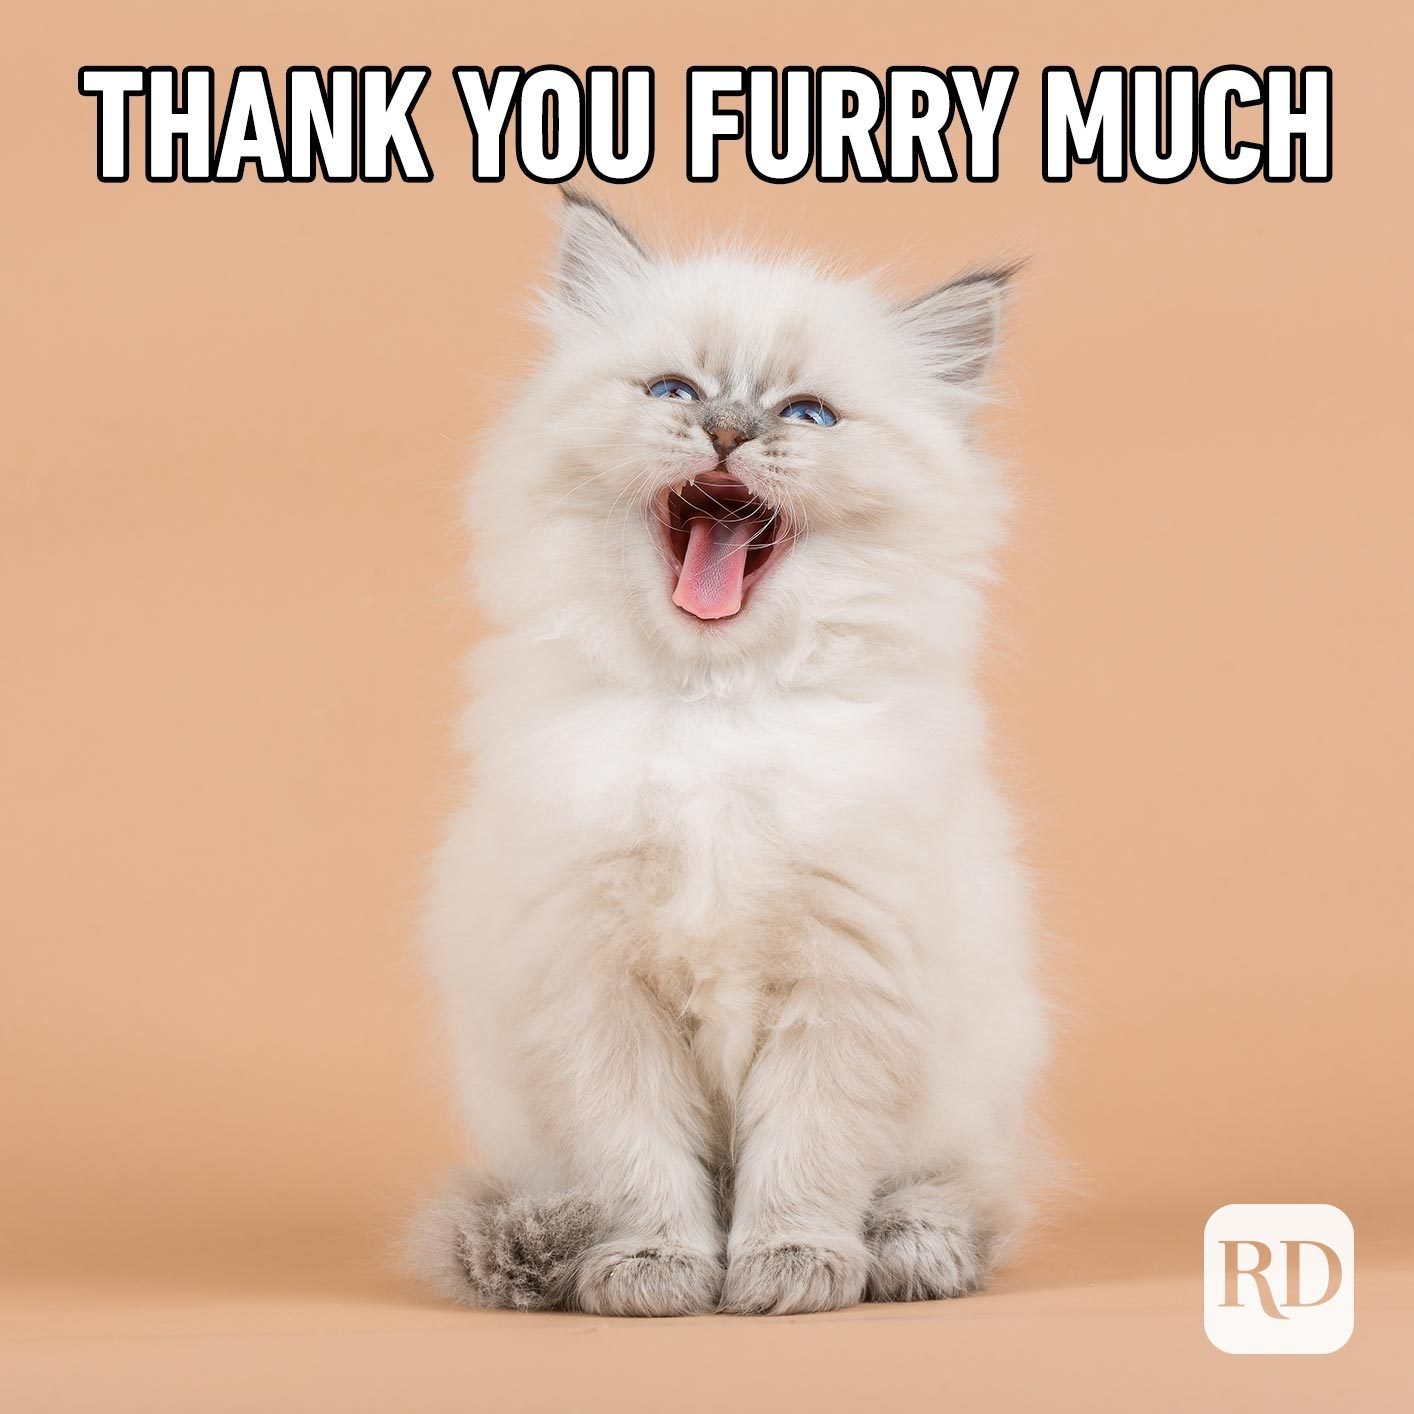 Cat screaming. Meme text: thank you furry much